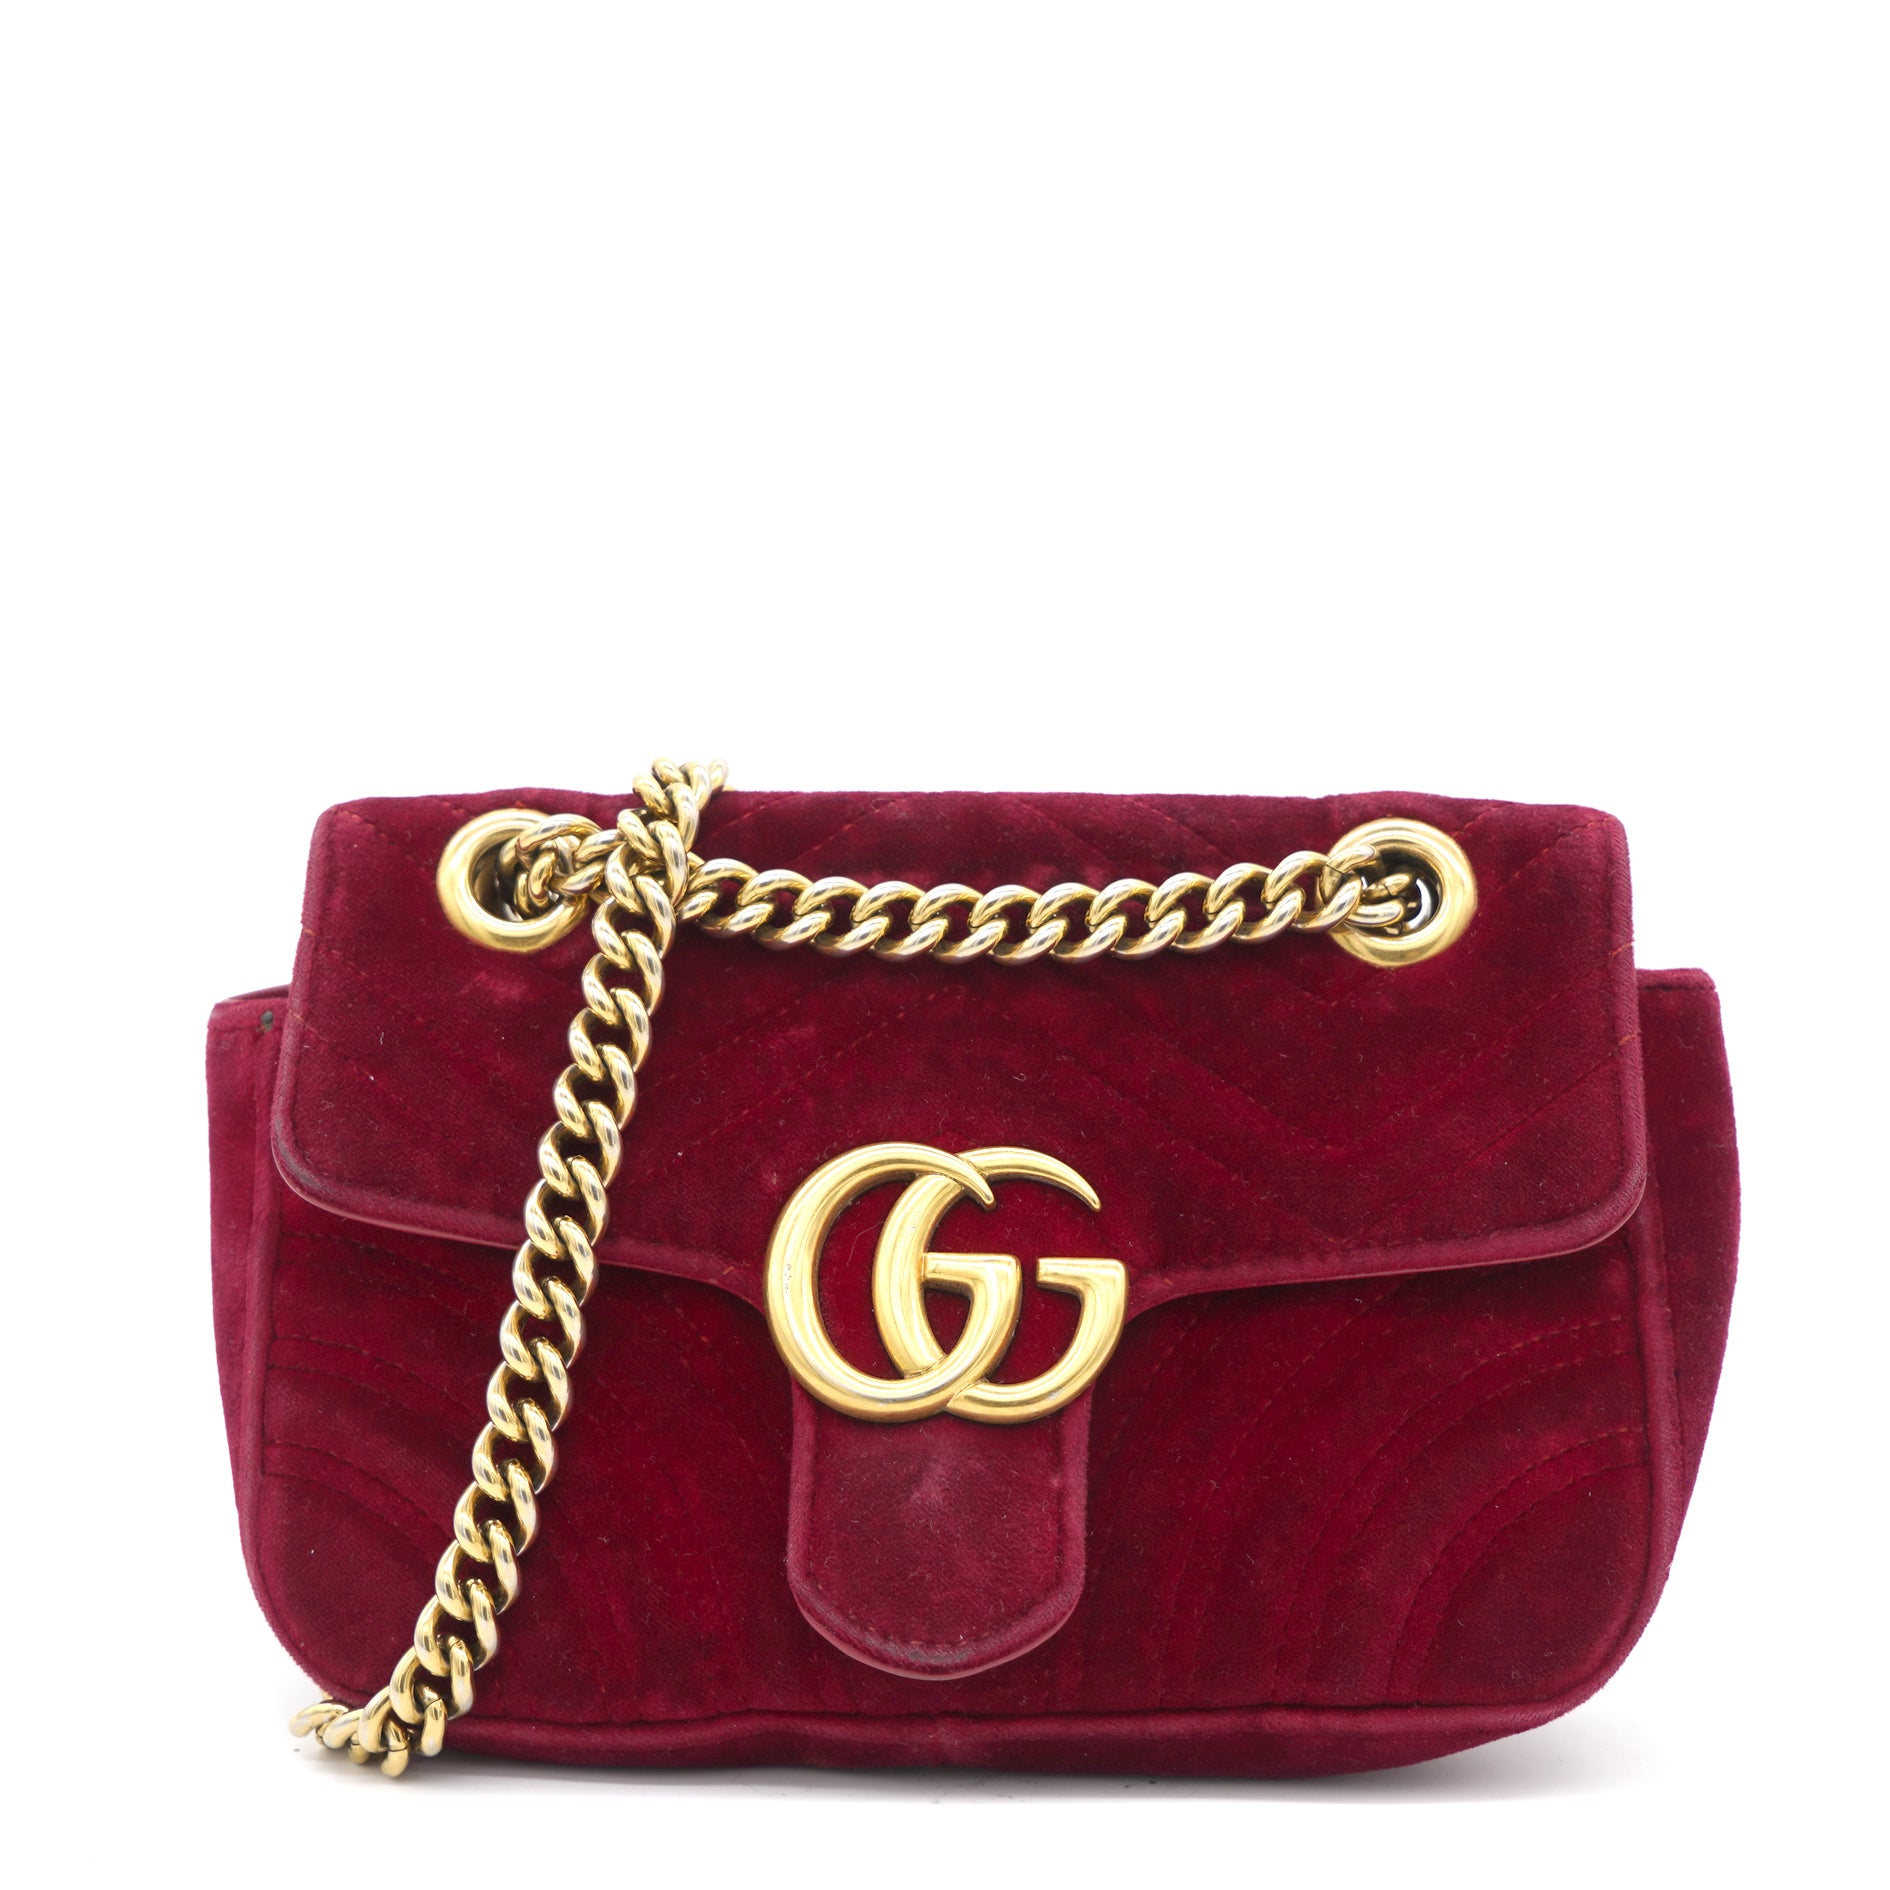 Gucci Soho Interlocking GG Red Leather Chain Flap Shoulder Bag Handbag  Italy New, Red, Medium: Buy Online at Best Price in UAE - Amazon.ae